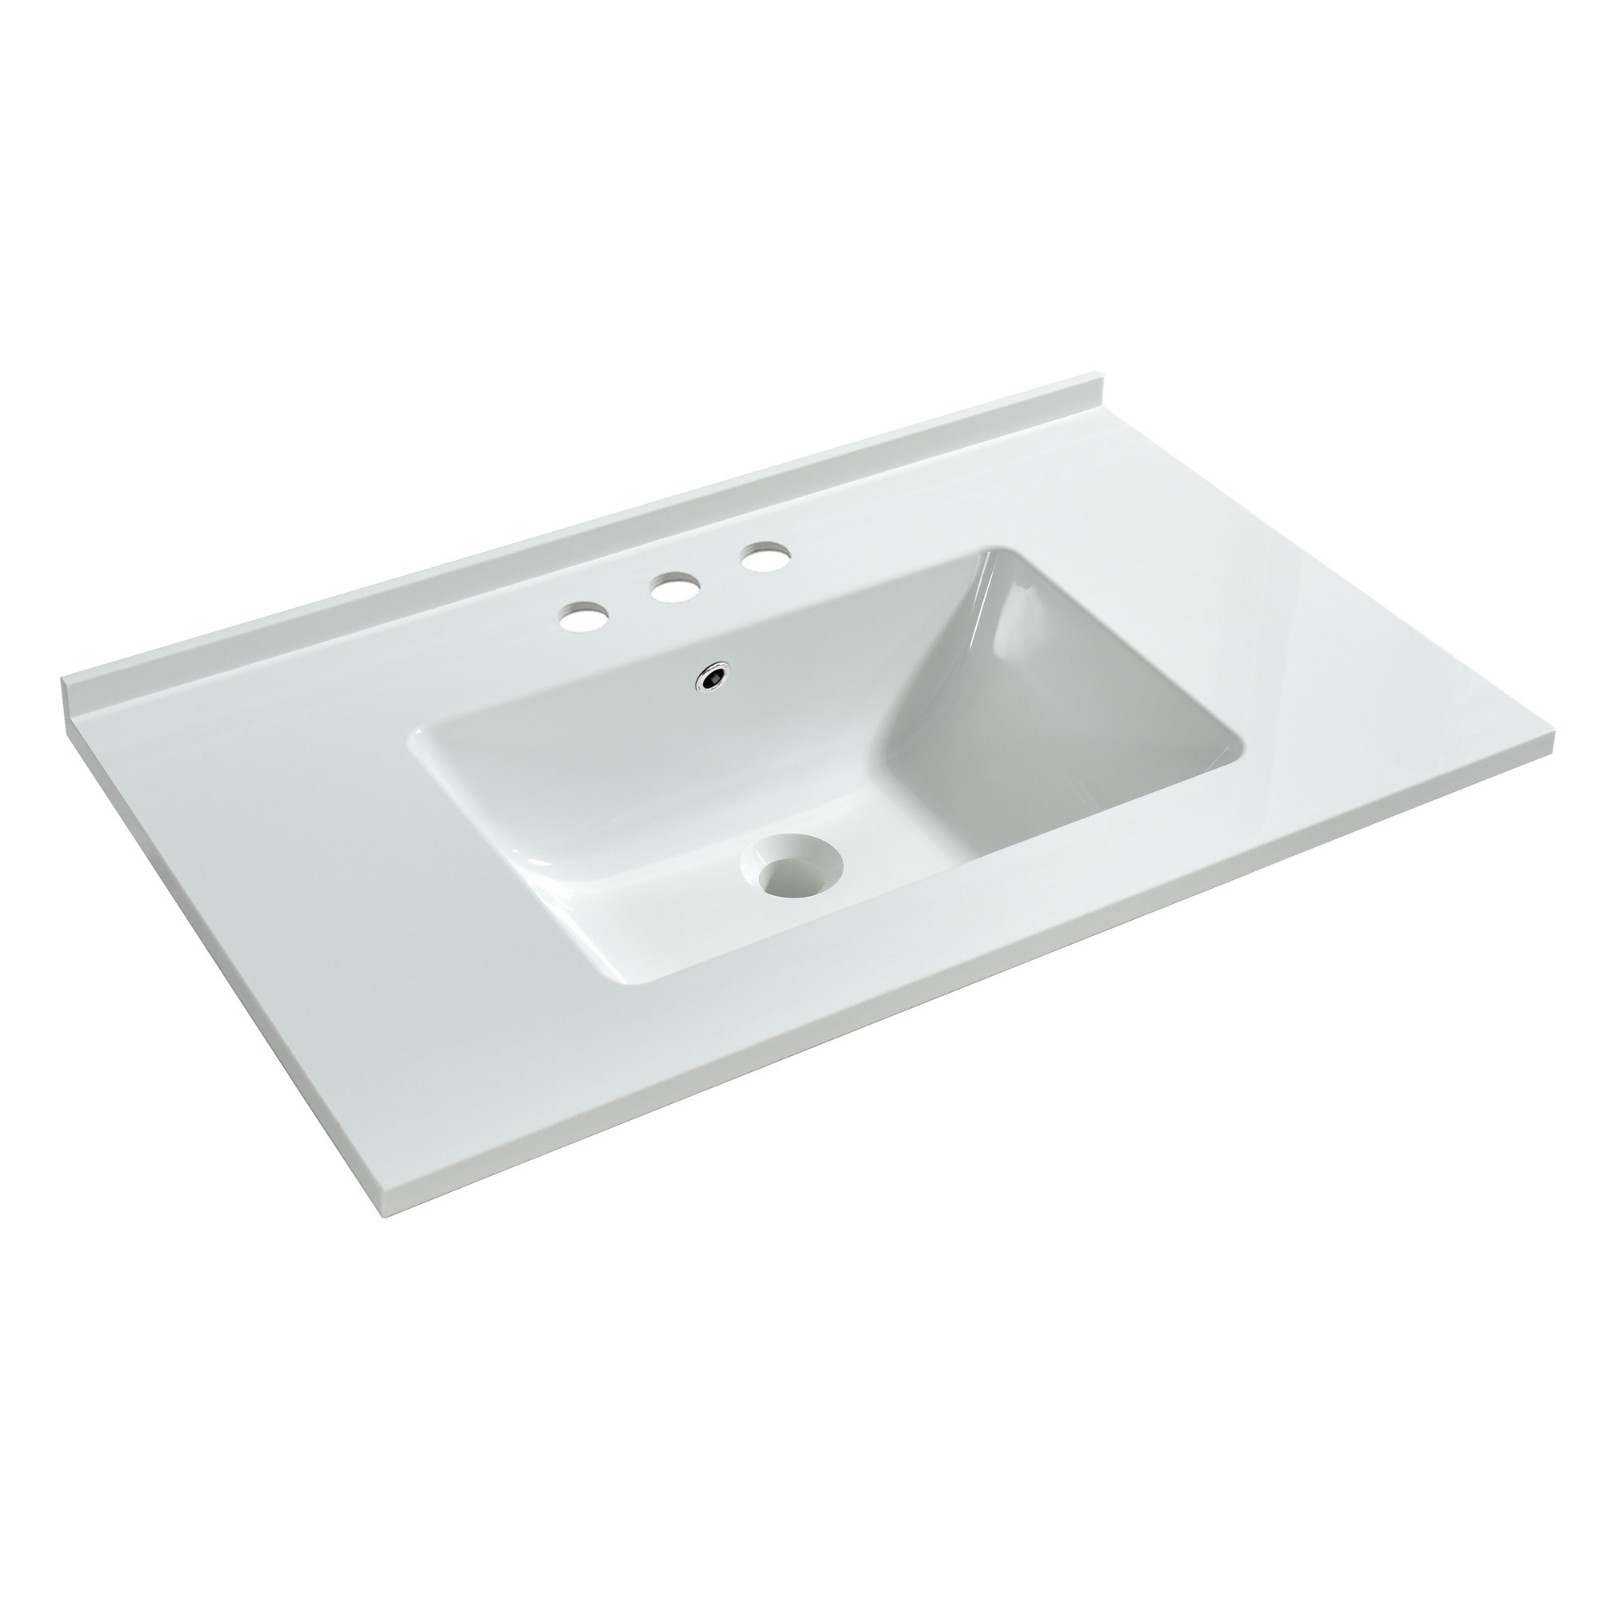  WOODBRIDGE VT3122-1008 Solid Surface Vanity Top with with Intergrated Sink and 3 Faucet Holes for 8-Inch Widespread Faucet, 31